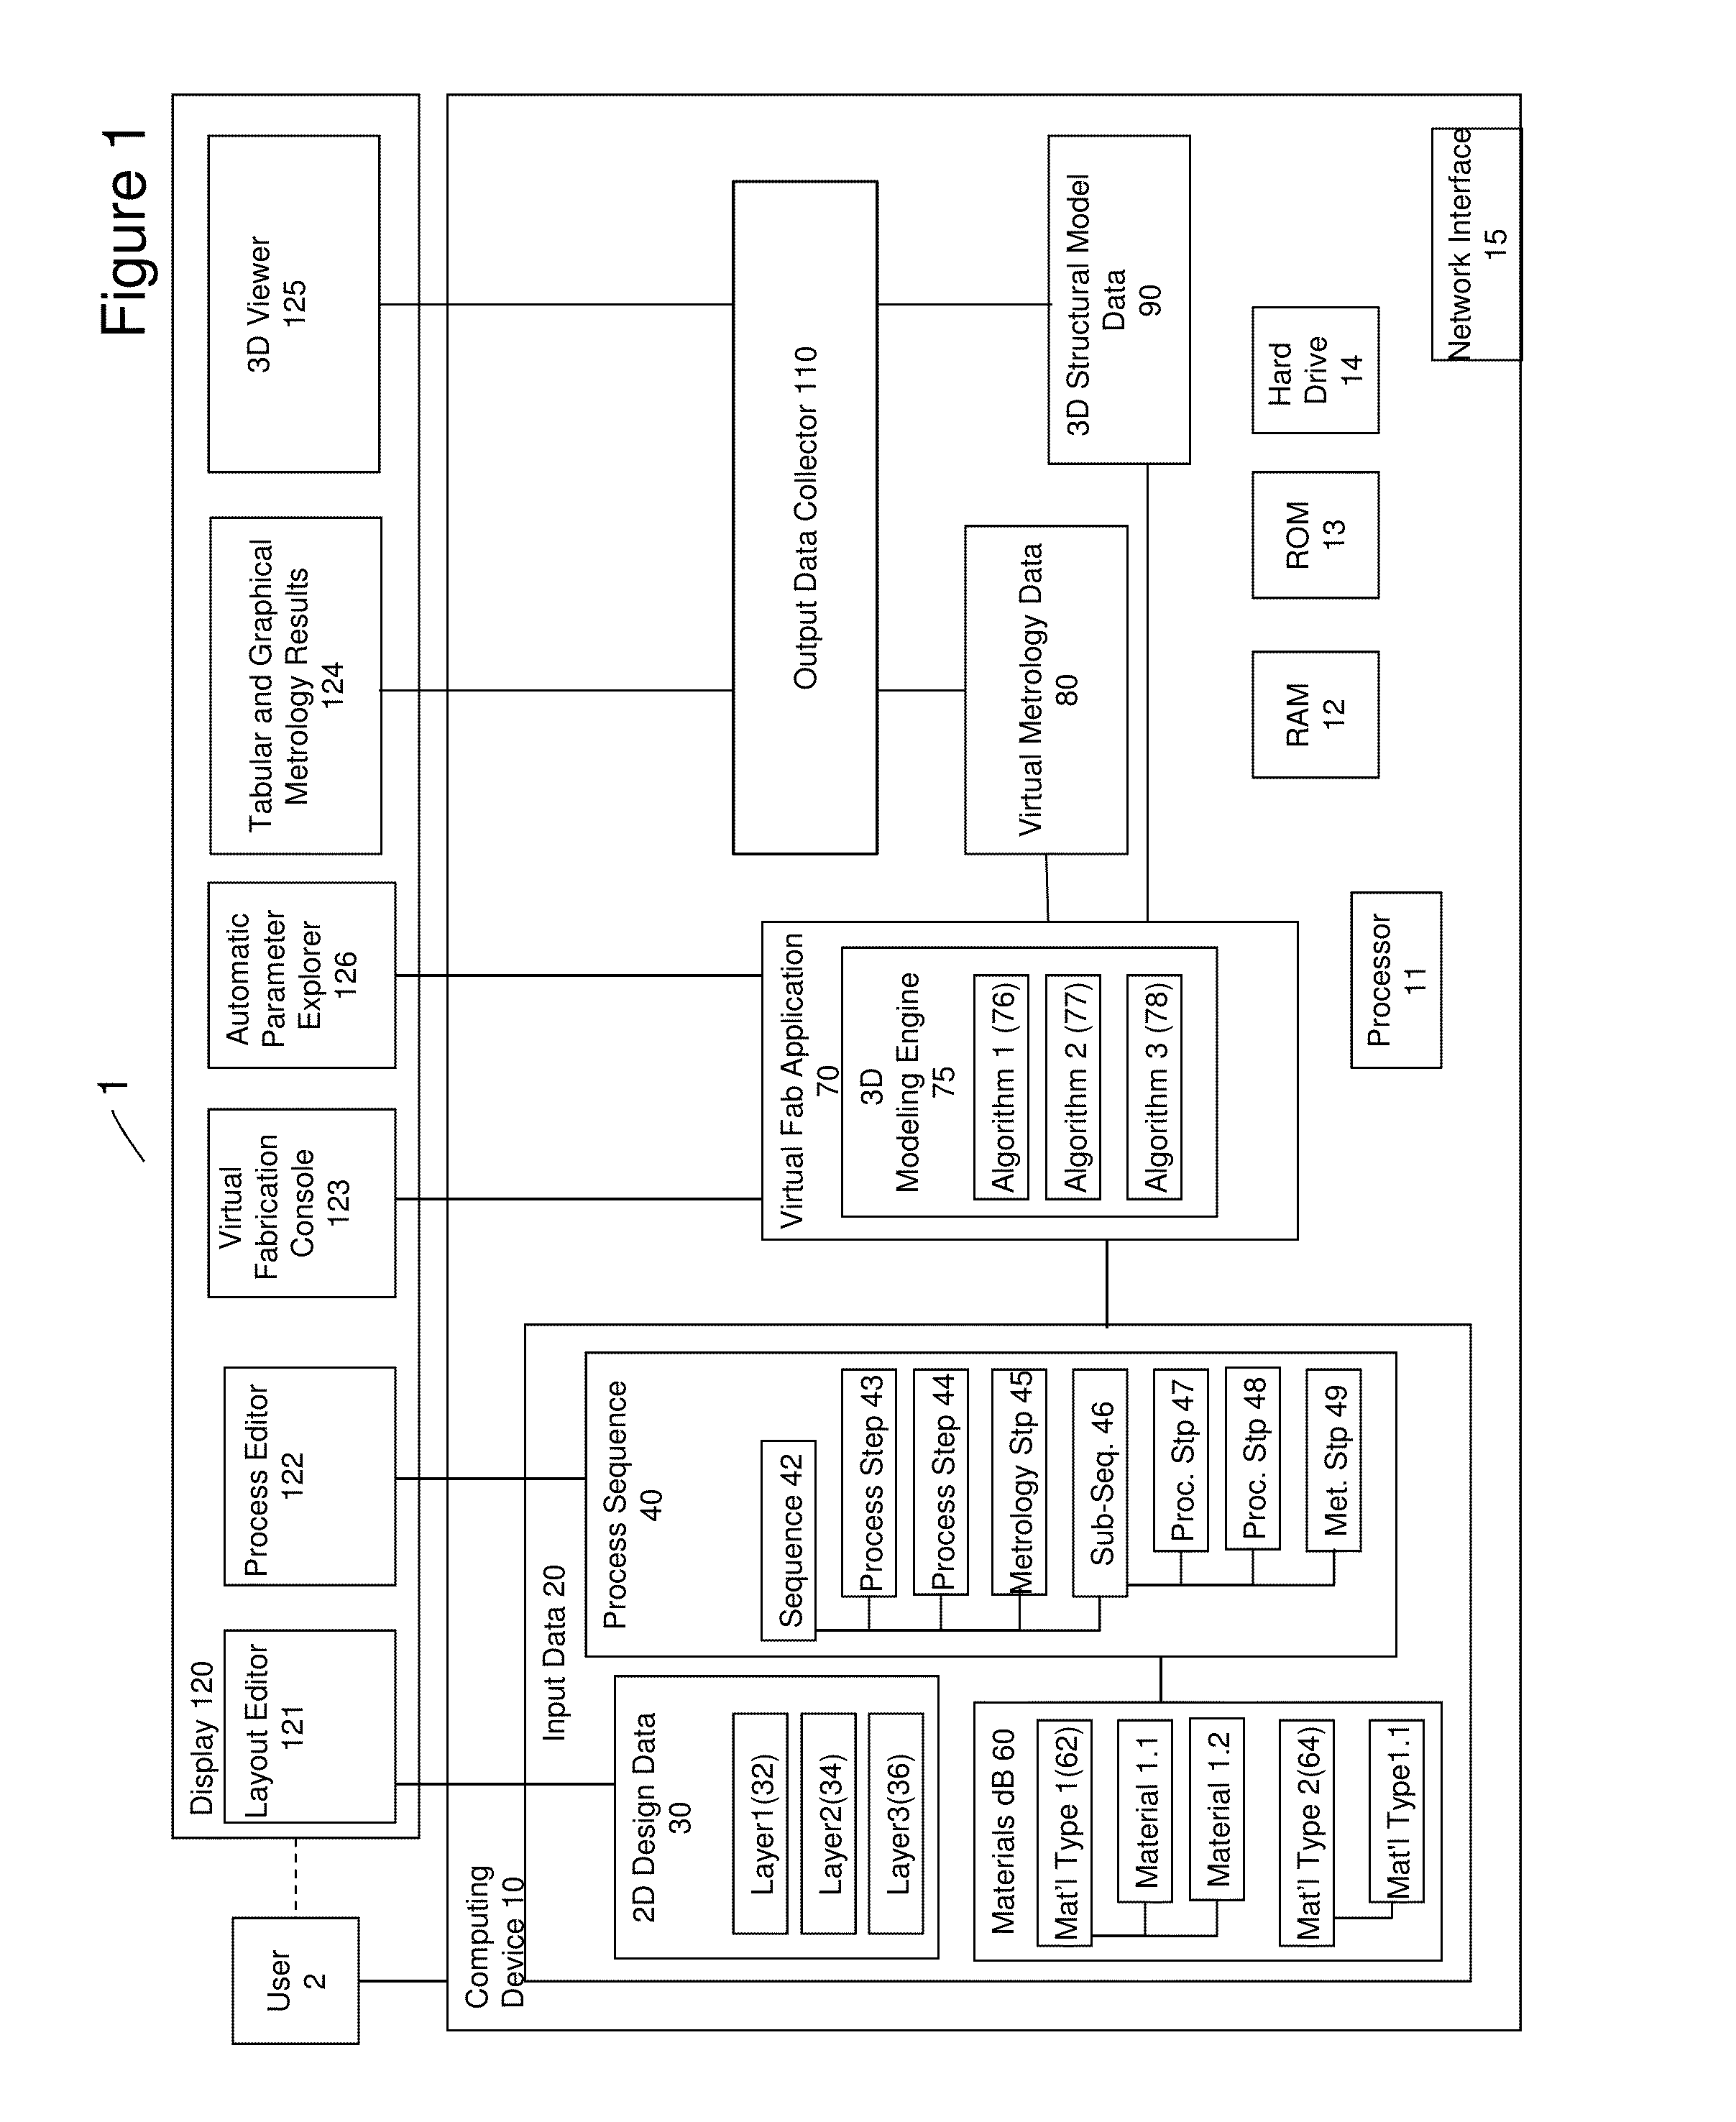 System and method for performing directed self-assembly in a 3-d virtual fabrication environment